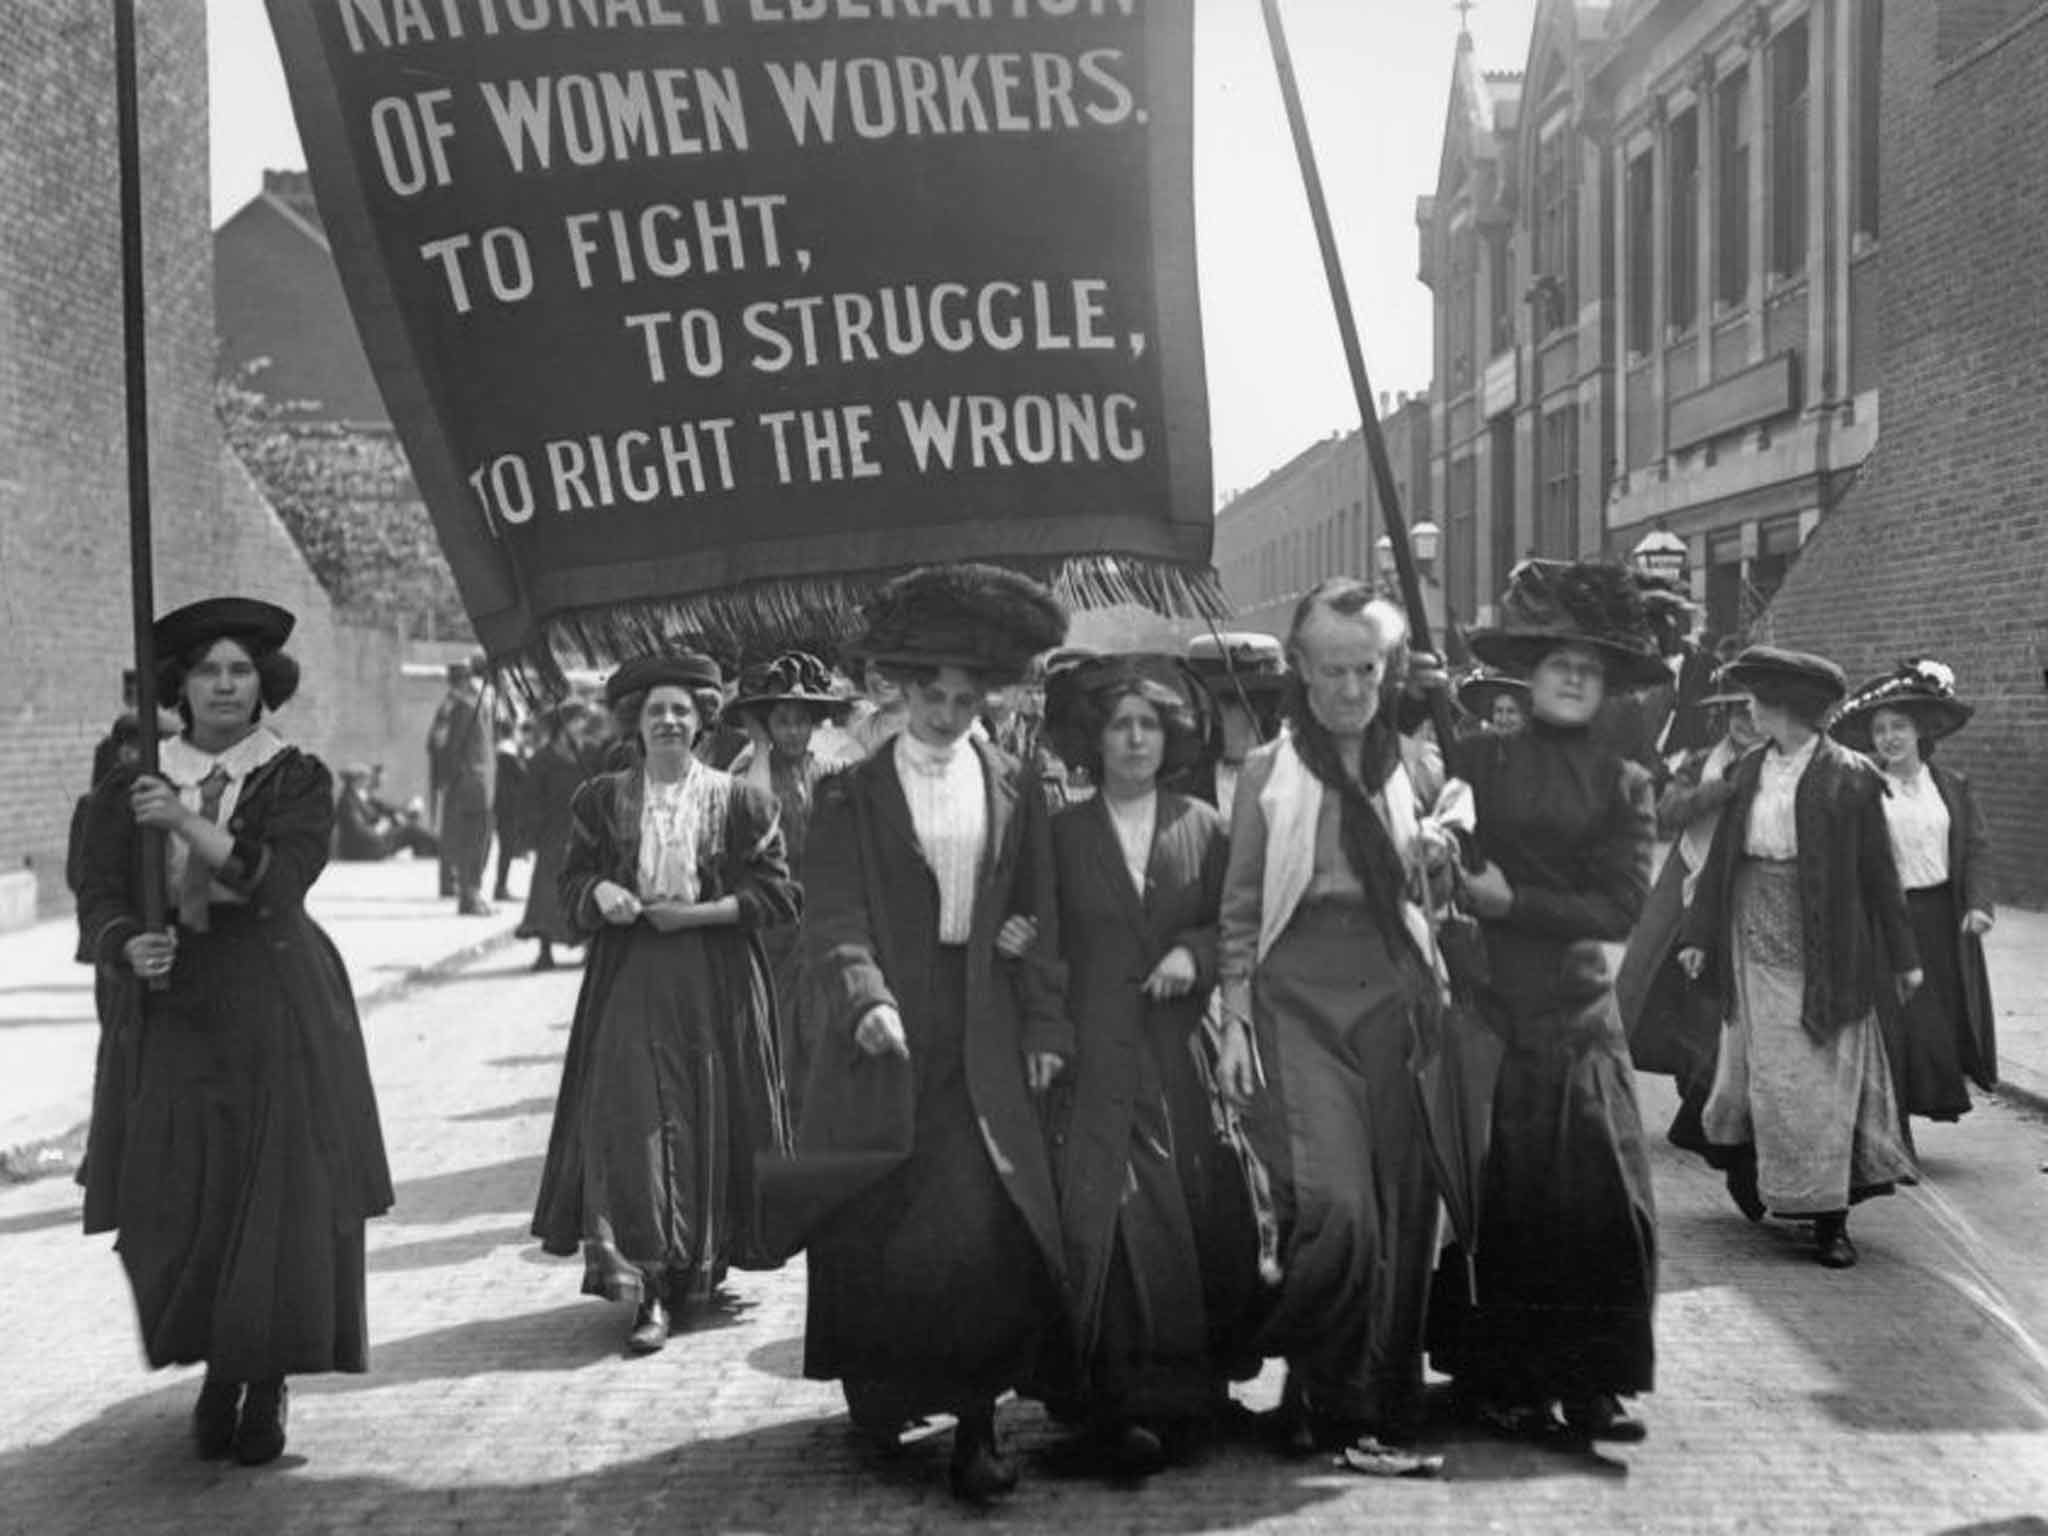 May 1911: British suffragette Charlotte Despard (1844 - 1939) (wearing a white waistcoat) heads a march of the National Federation of Women Workers through Bermondsey in South London